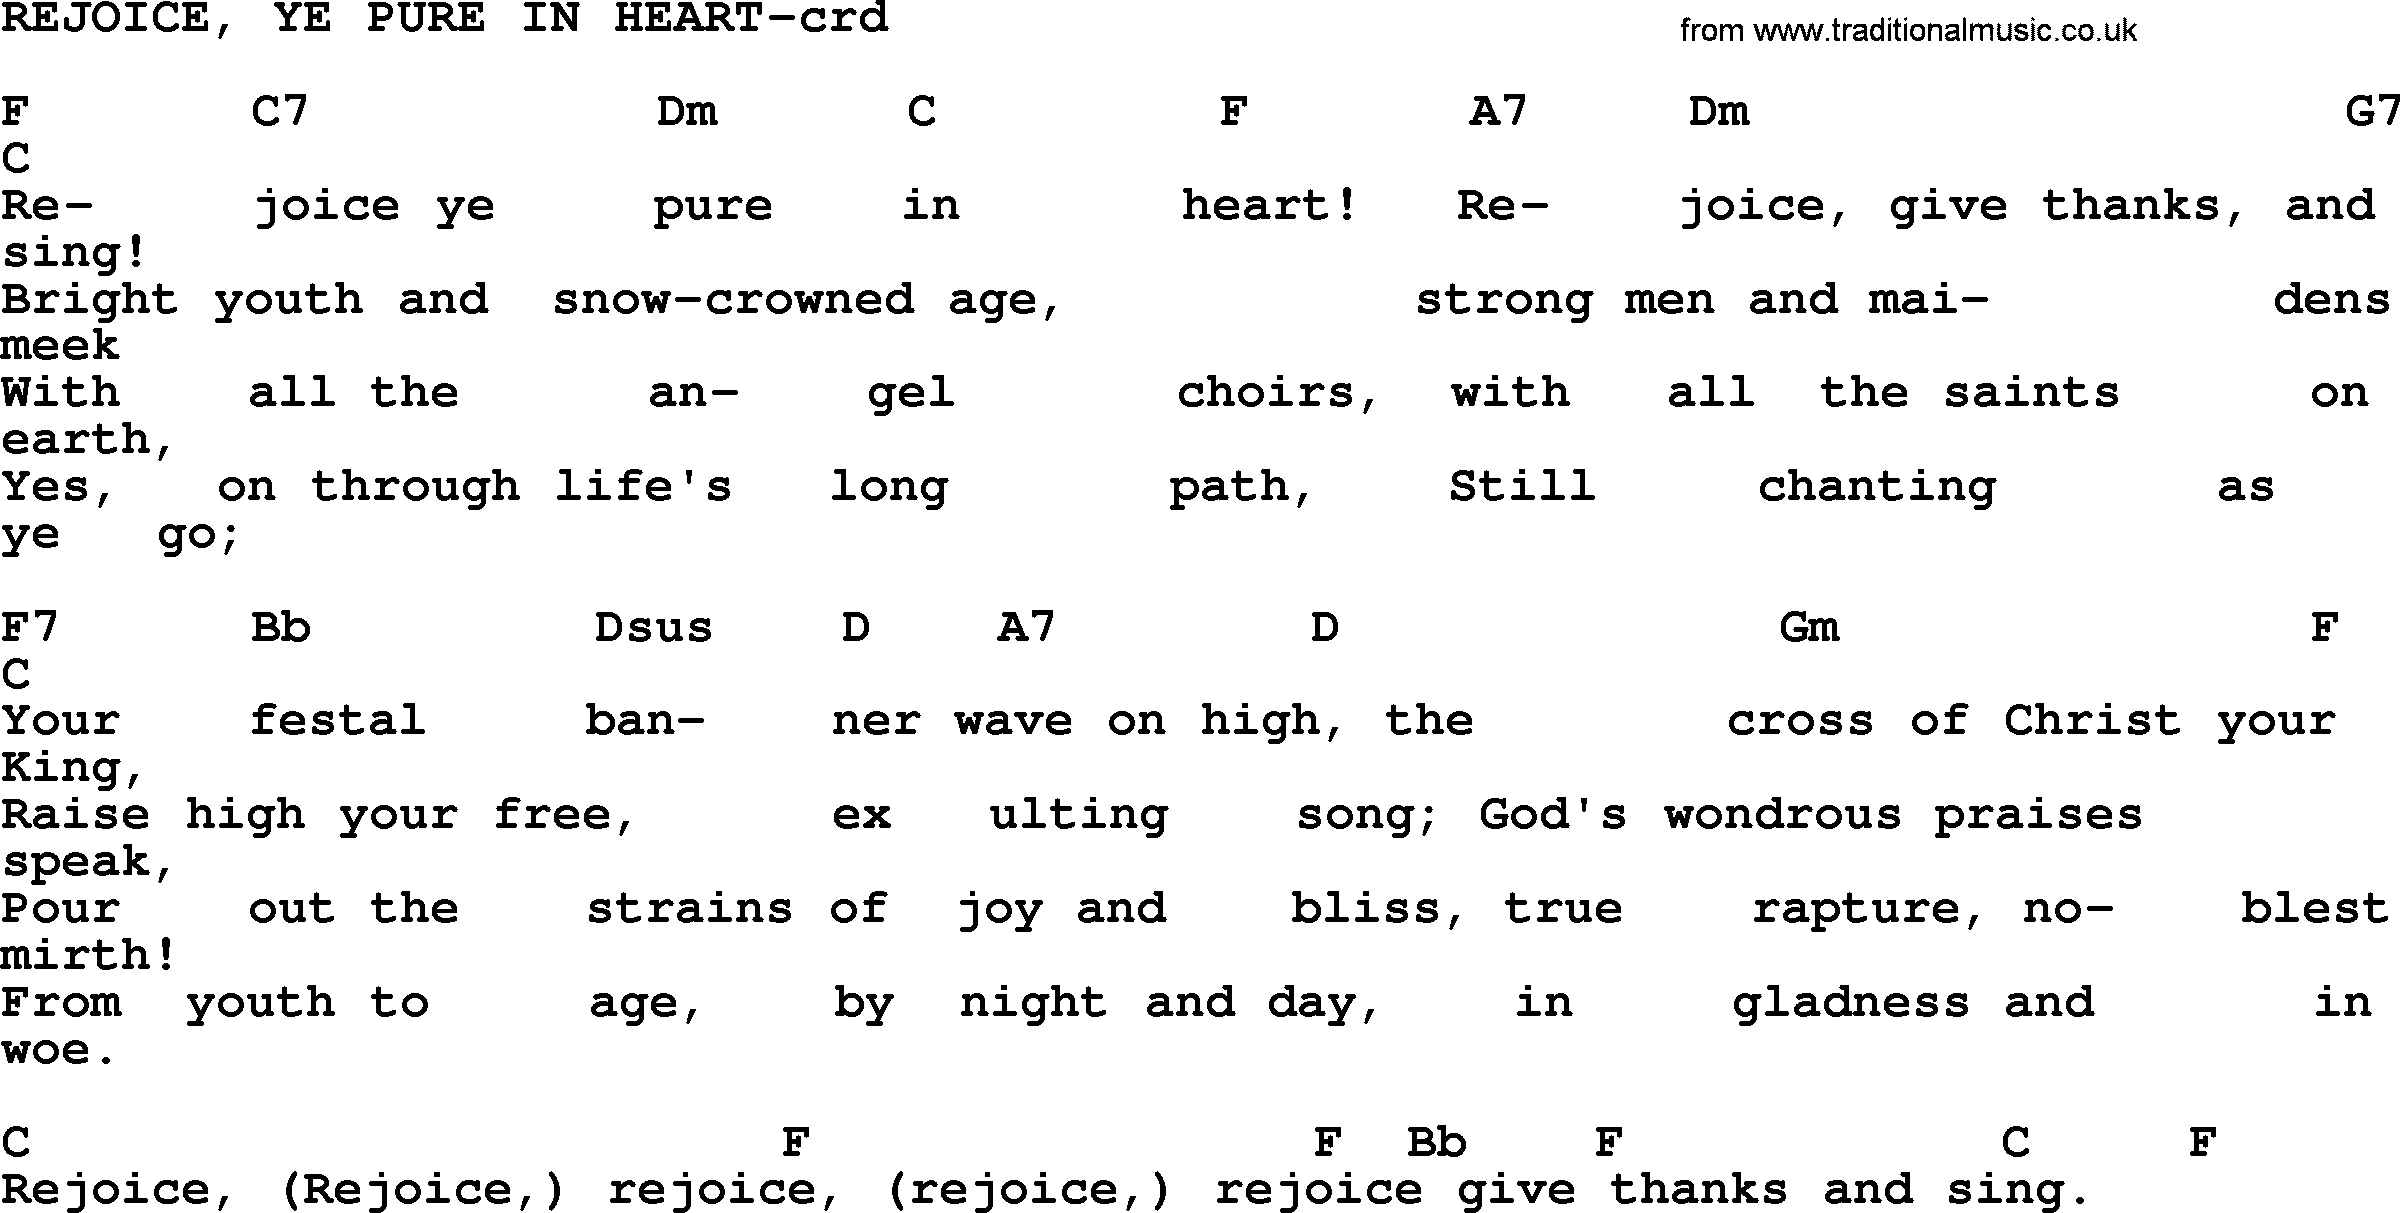 Ascensiontide Hynms collection, Hymn: Rejoice, Ye Pure In Heart lyrics, chords and PDF